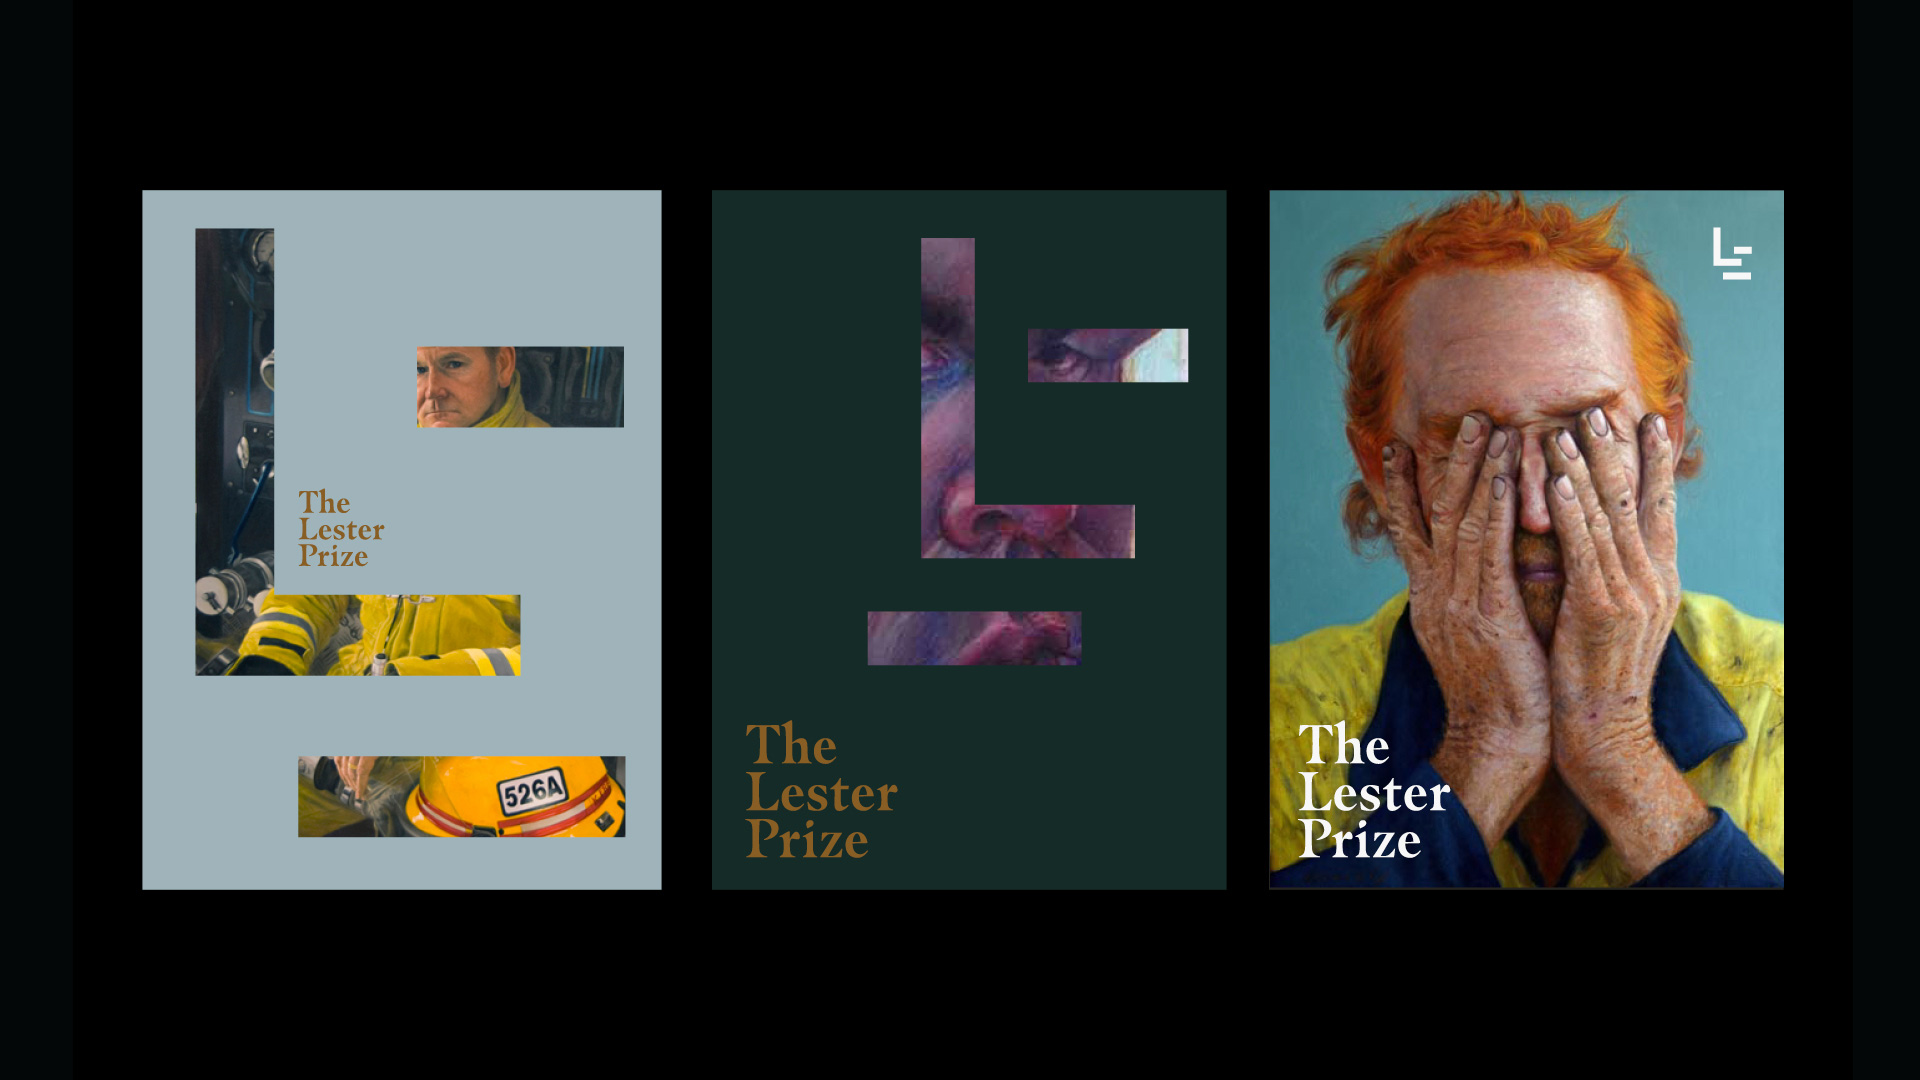 New Logo and Identity for The Lester Prize by Block